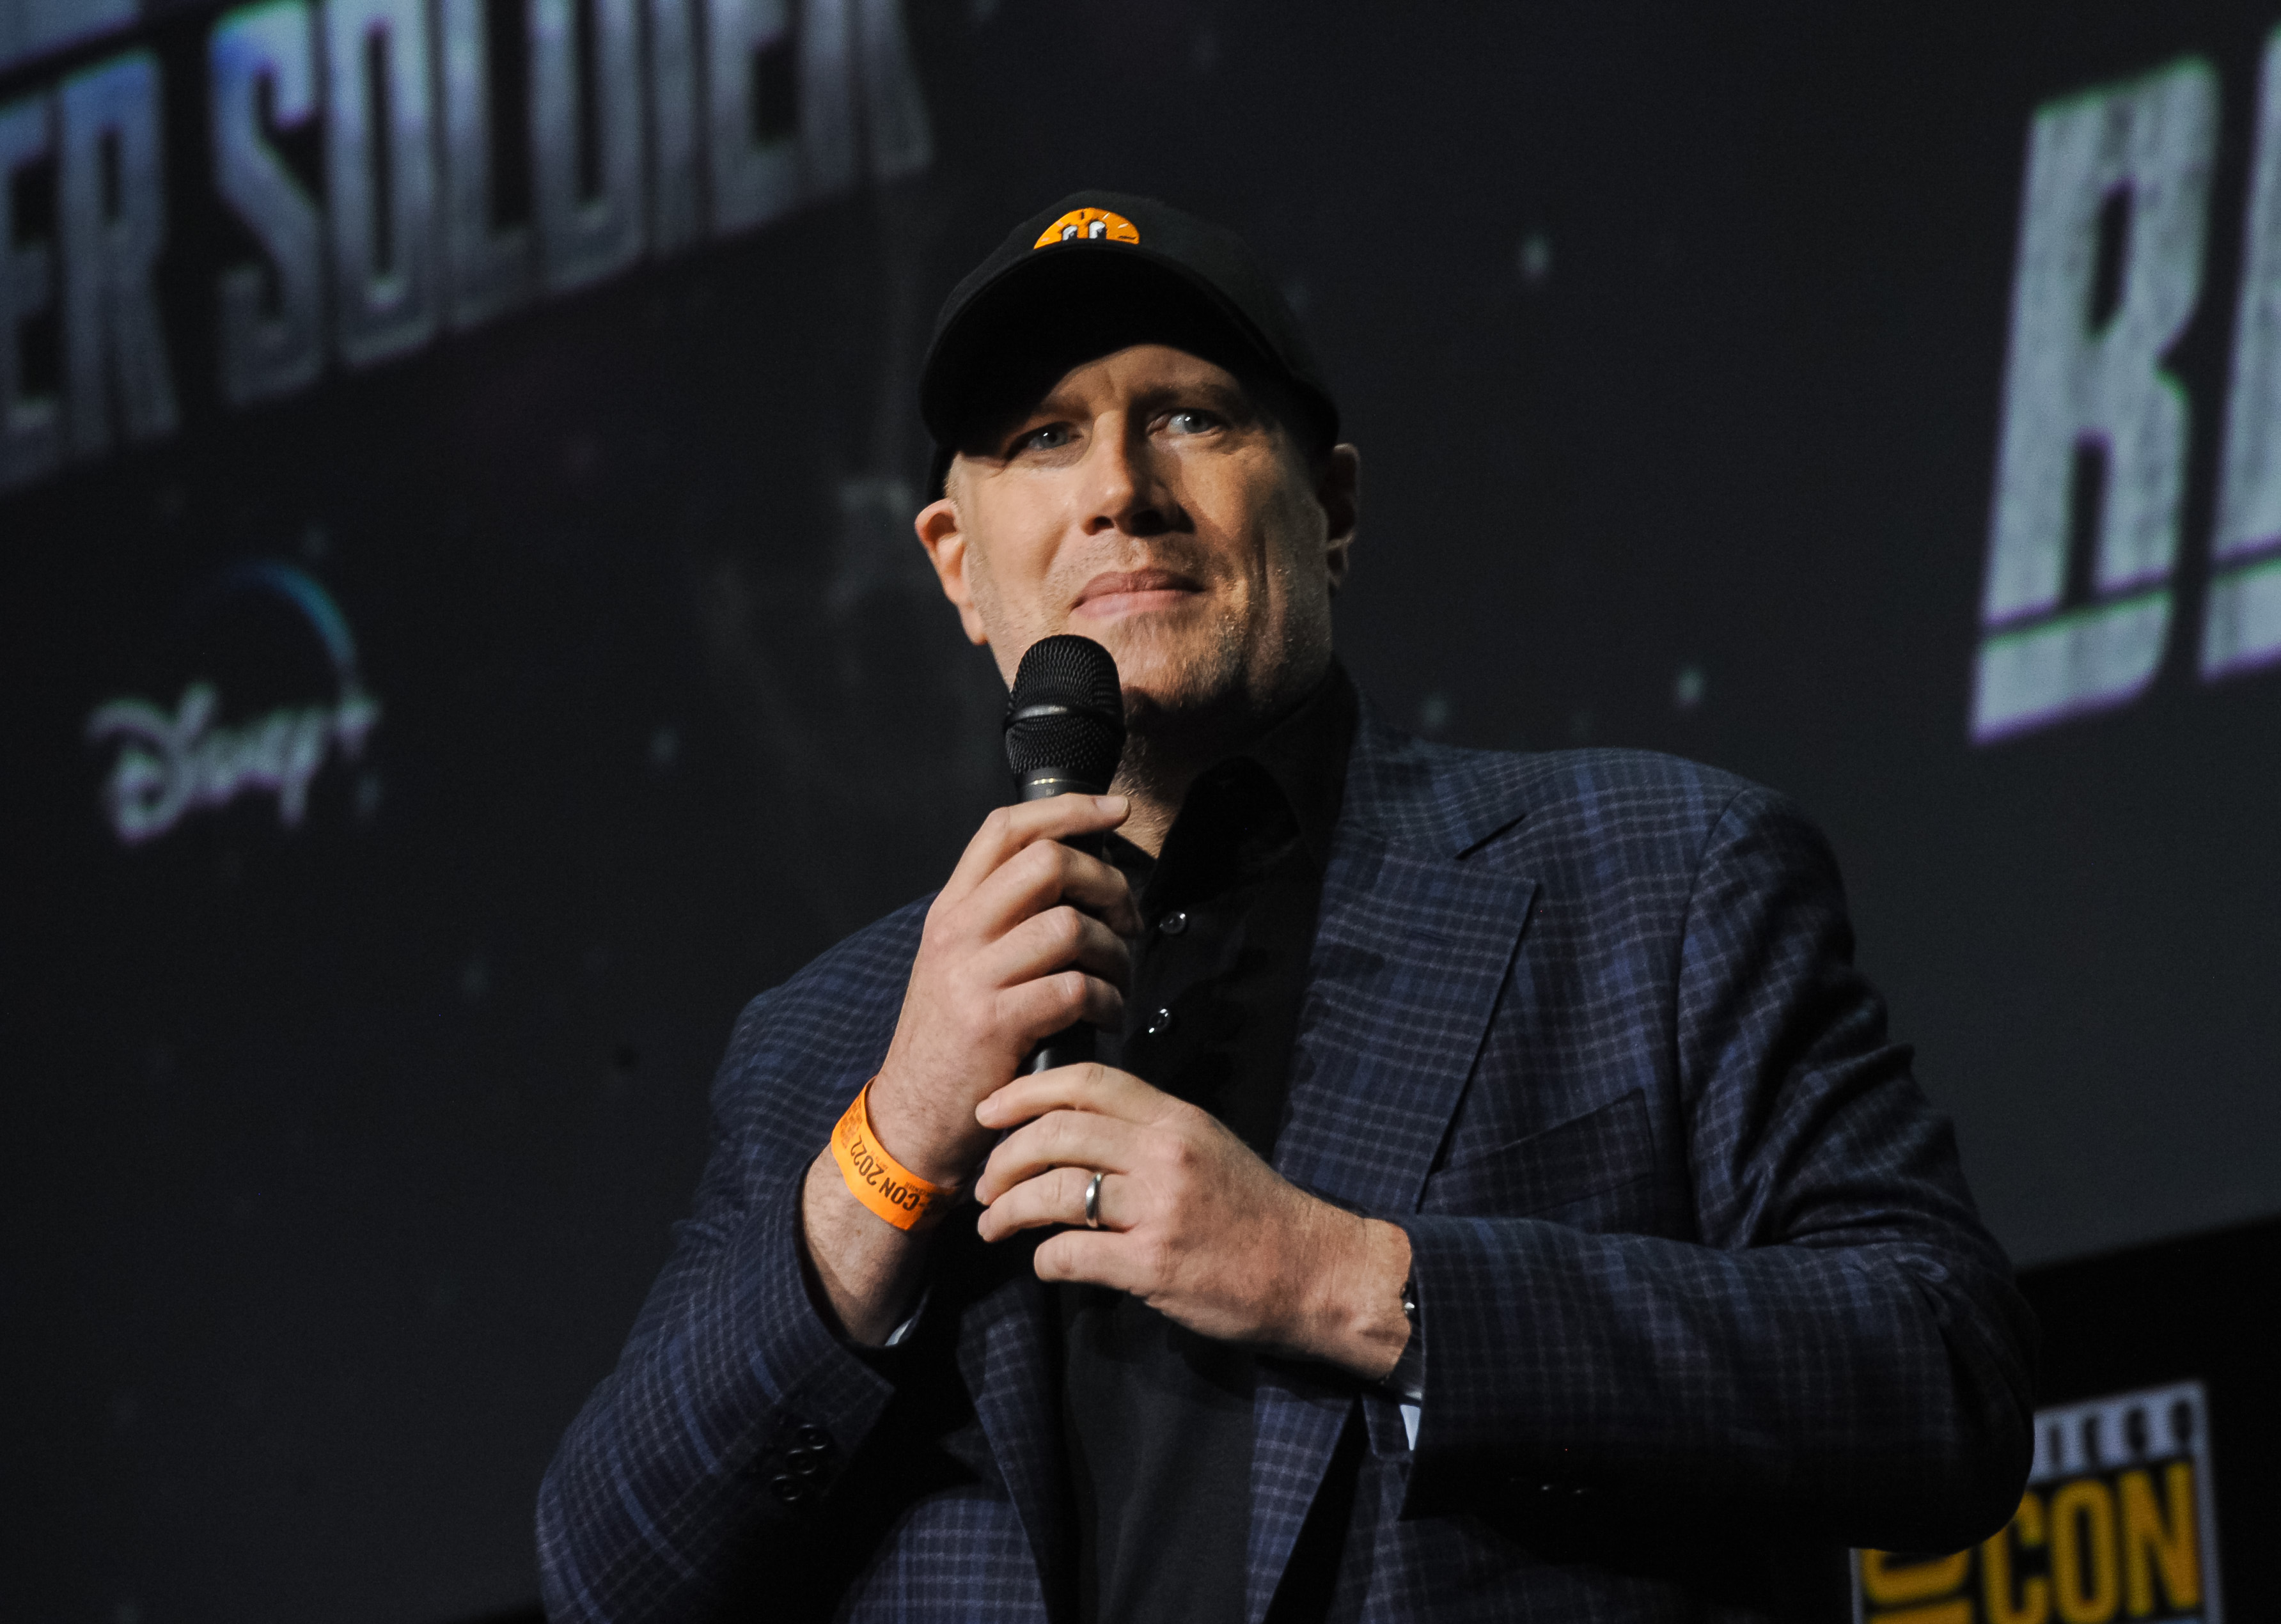 Kevin Feige, who spearheaded Phase 4 of the MCU, wears a dark plaid suit over a black button-up shirt and a black baseball cap with an image of Miss Minutes from 'Loki' on the front.